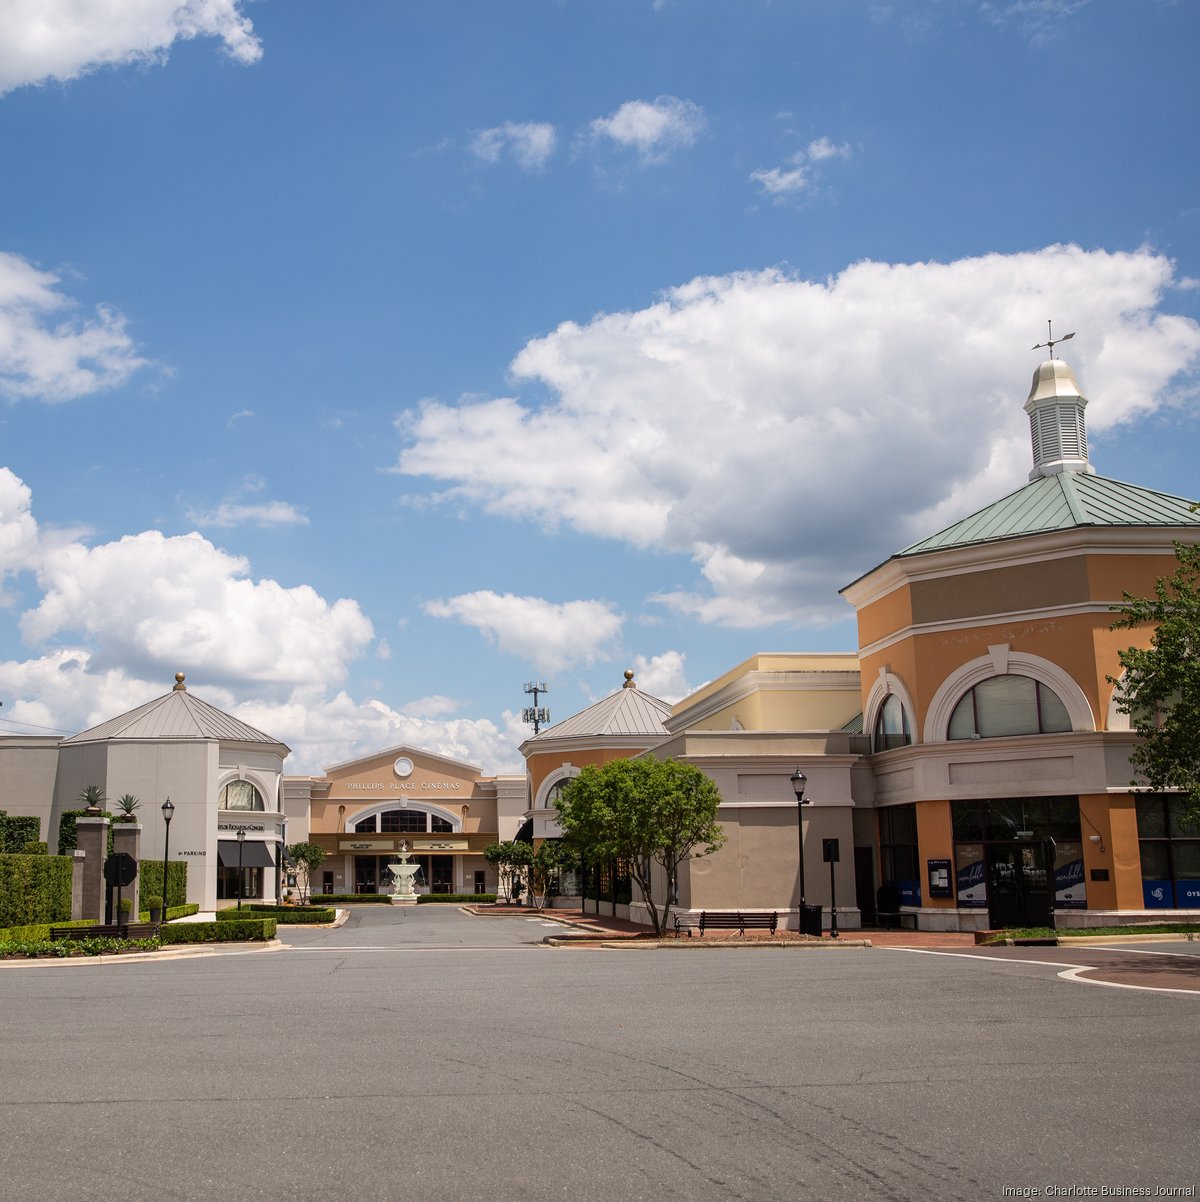 Venerable SouthPark Continues to Draw Development, Corporate Relocations -  Charlotte Business Journal